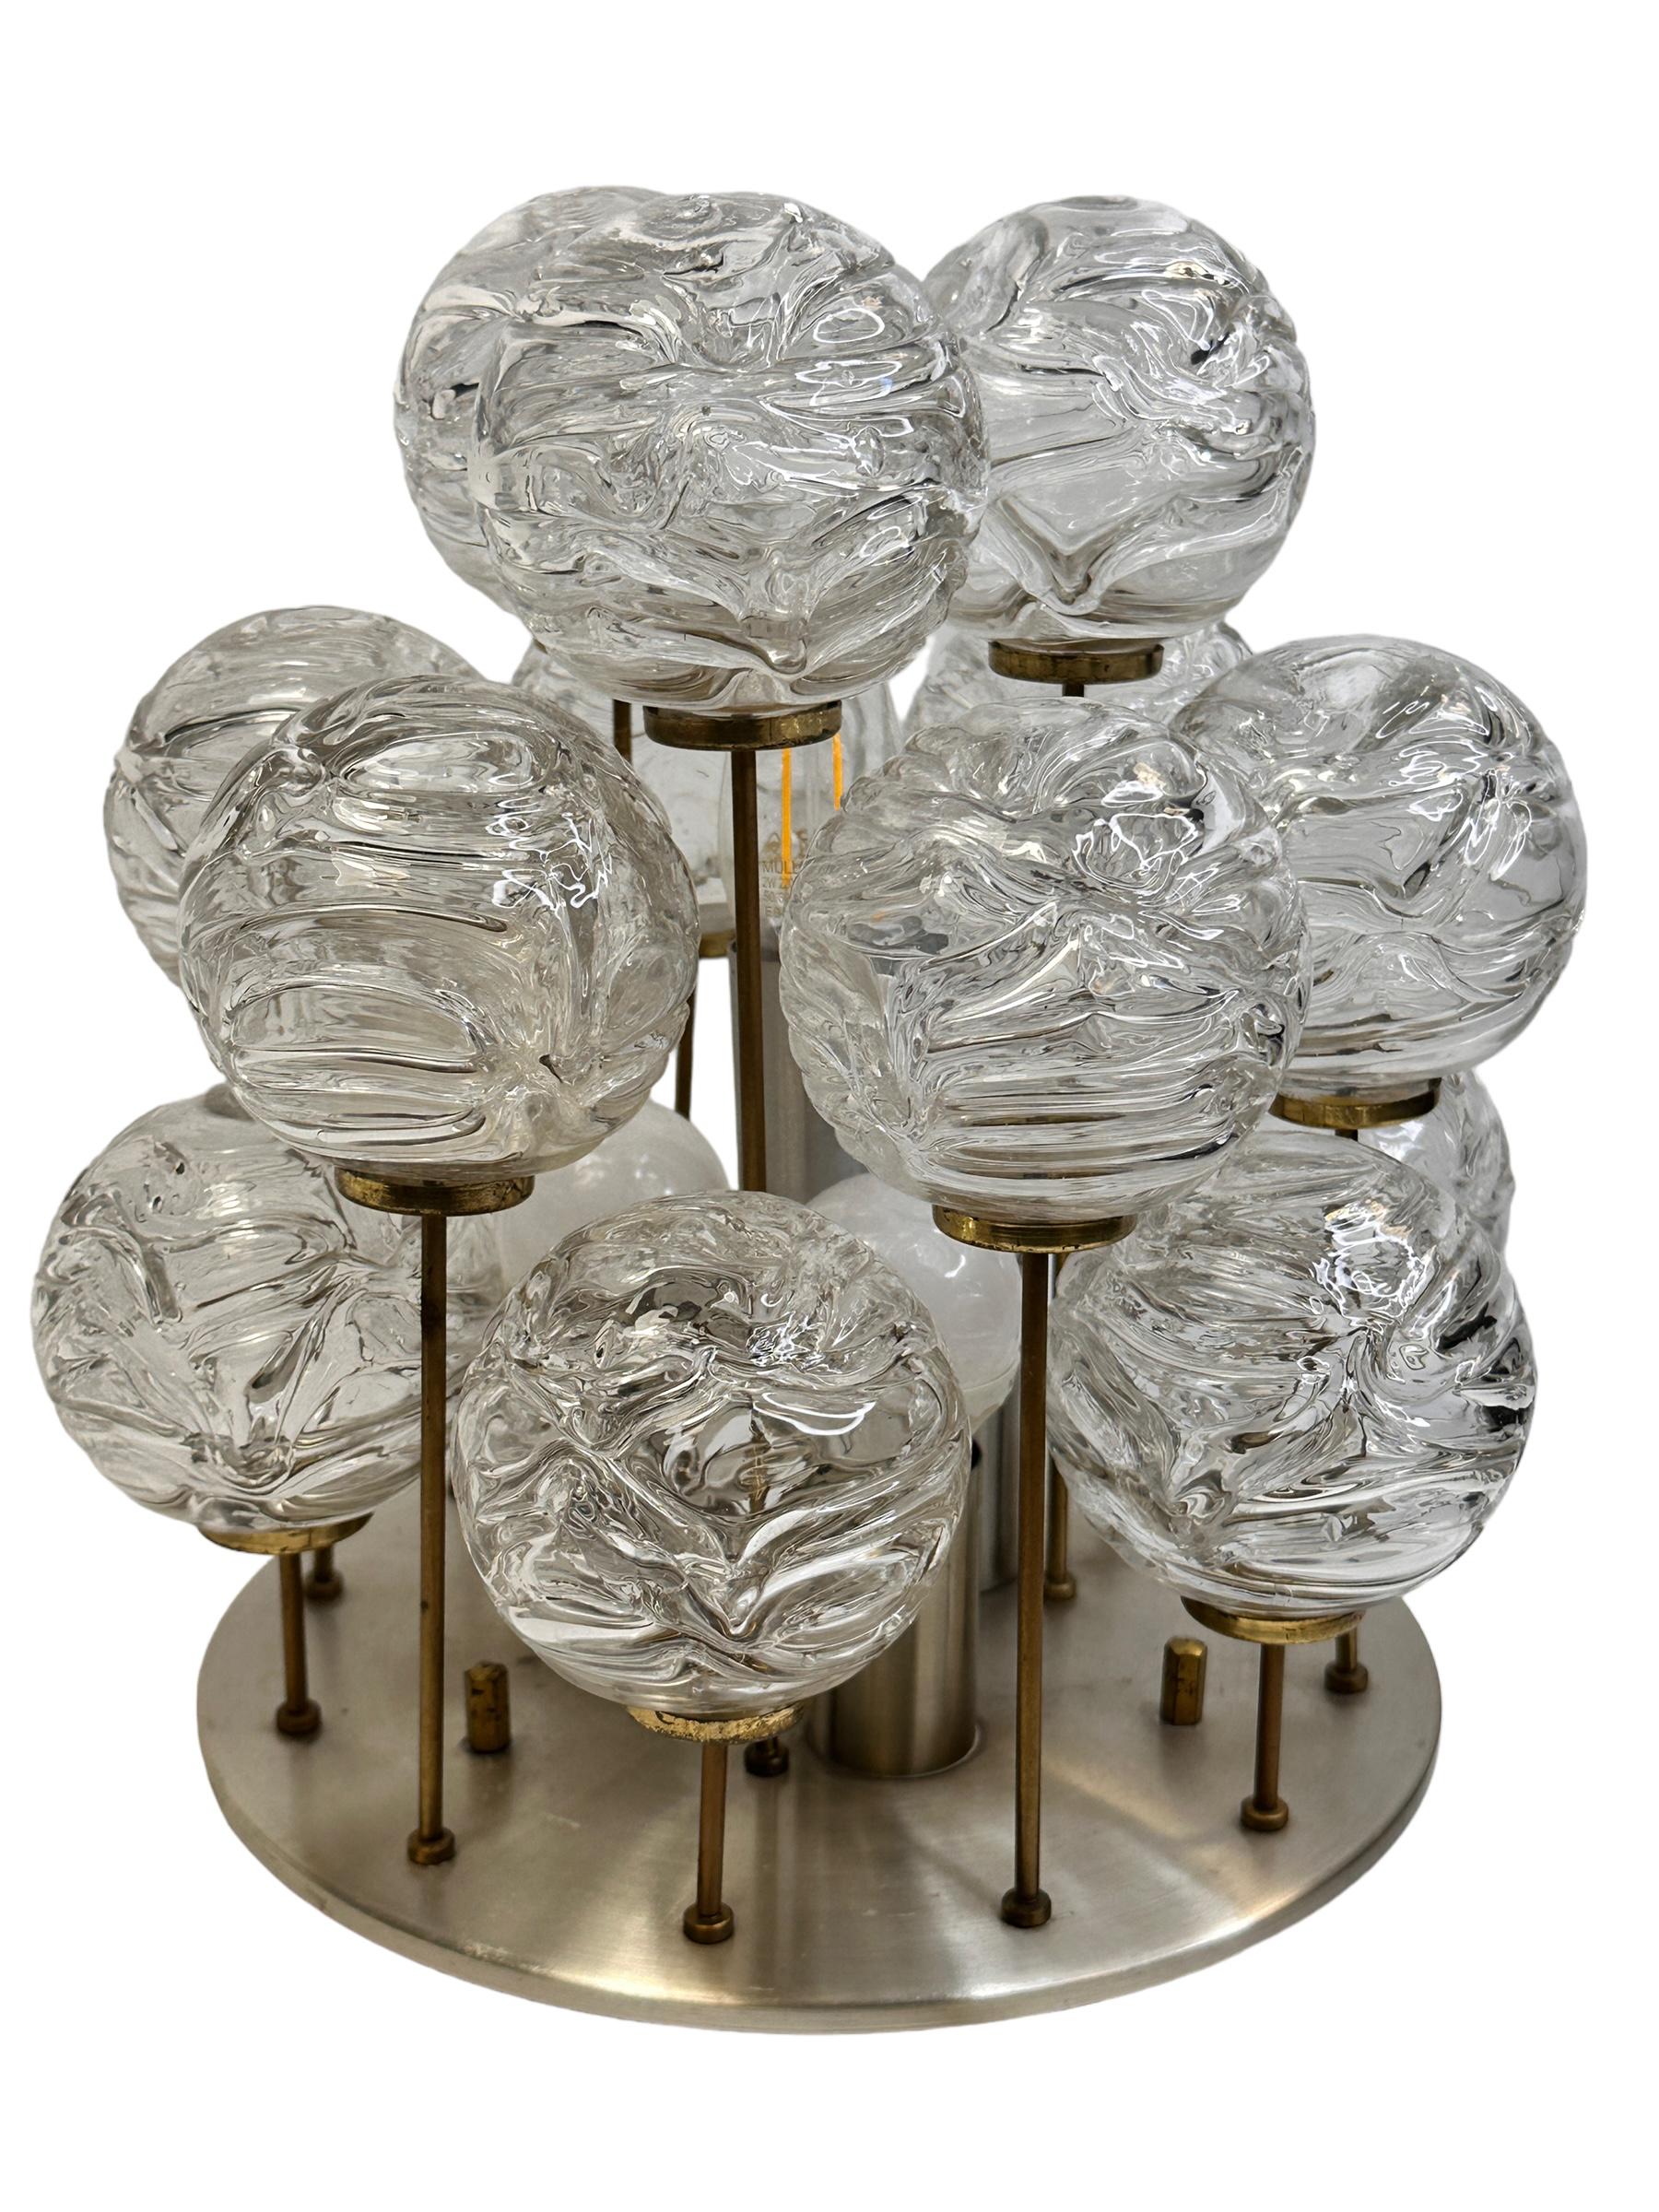 Mid-20th Century Swirled Glass Ball Flush Mount Fixture by Doria Leuchten, Germany, 1960s For Sale